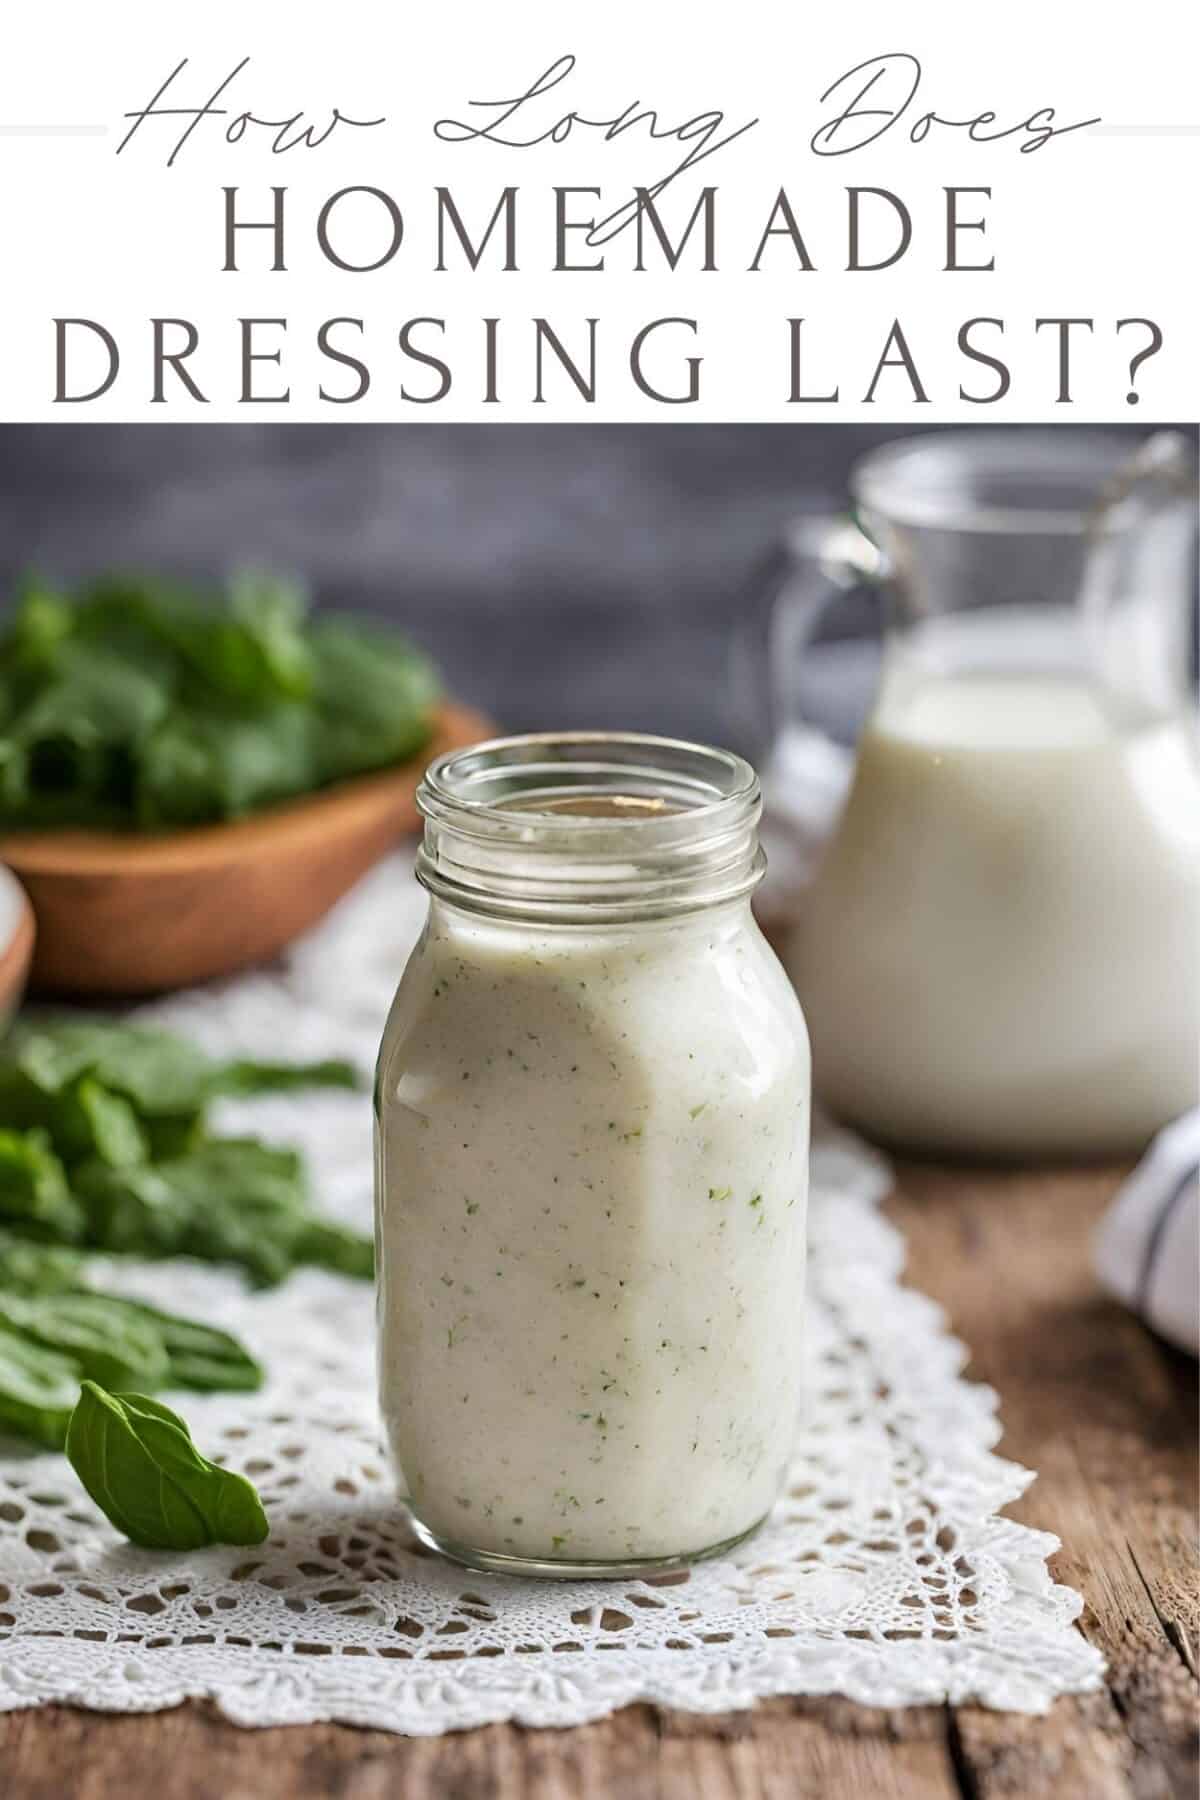 Homemade dressings can be so rewarding to make! They taste so good, and they can be made from pennies on the dollar compared to store-bought dressings. Here are some good storage method ideas for how long they can last in the fridge.